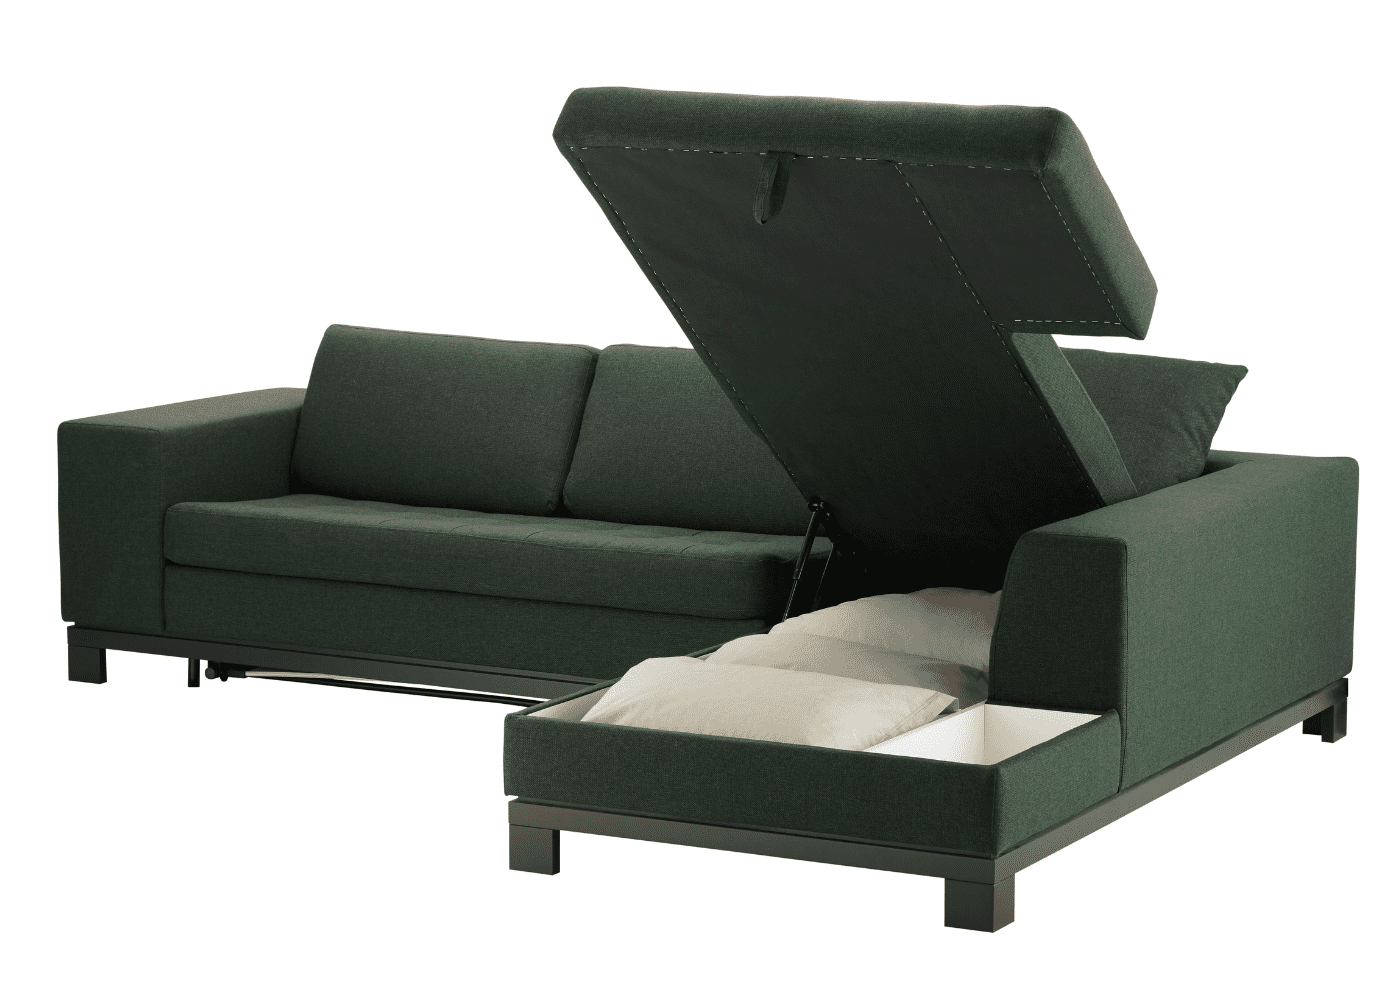 A green couch with built-in storage.